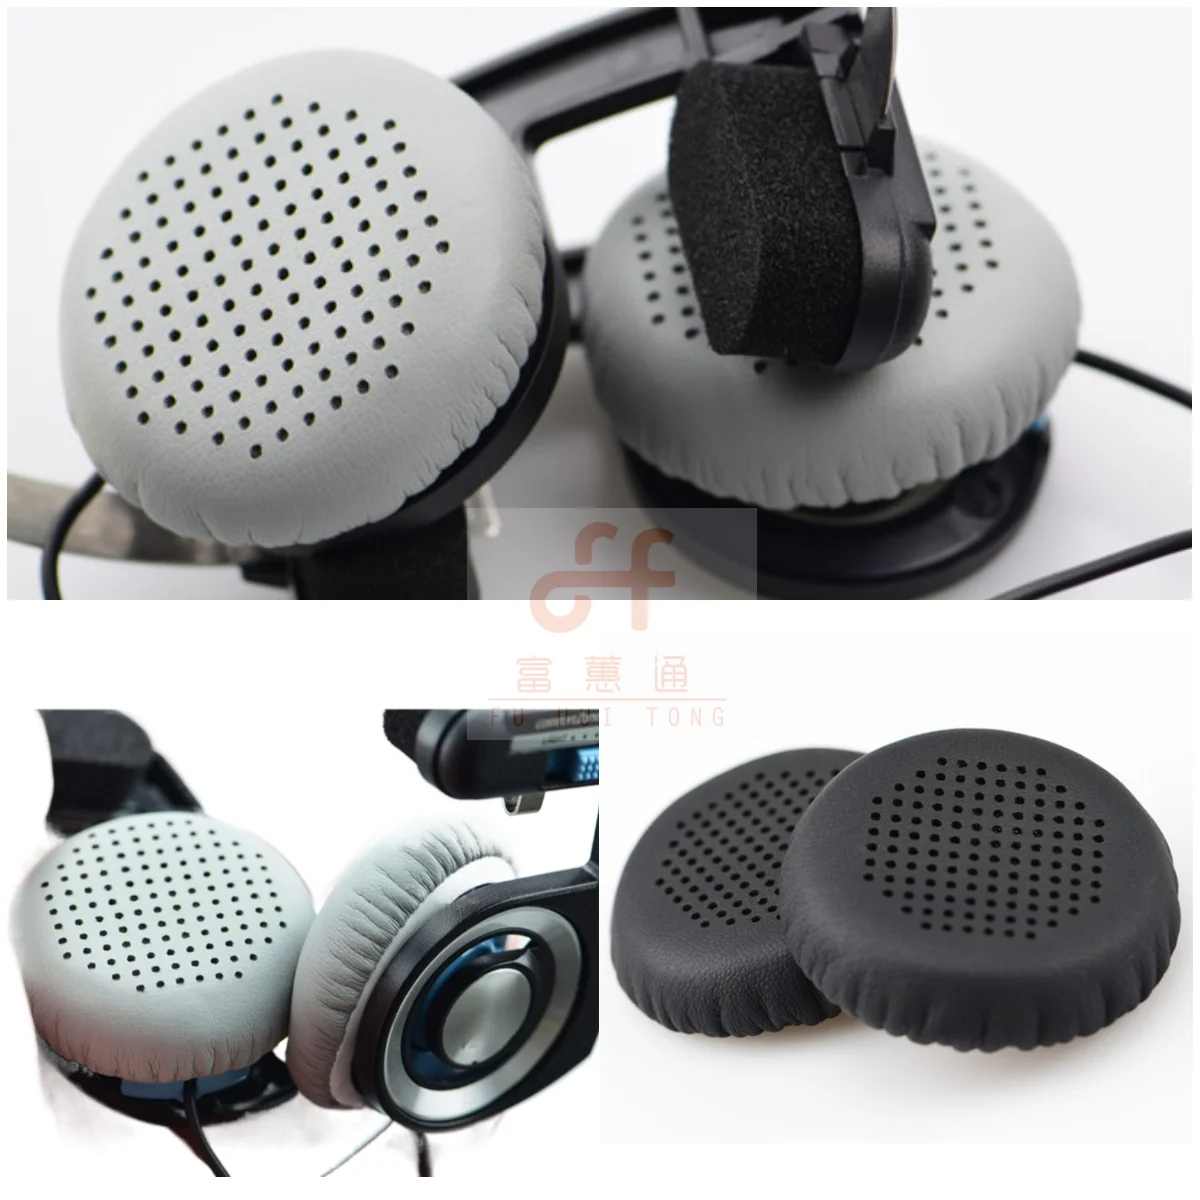 

A Pair of 48MM Replacement Foam Ear Pads for KOSS Porta Pro PP KSC35 KSC75 KSC55 Headphone Earmuffs Cover PX100 Universal